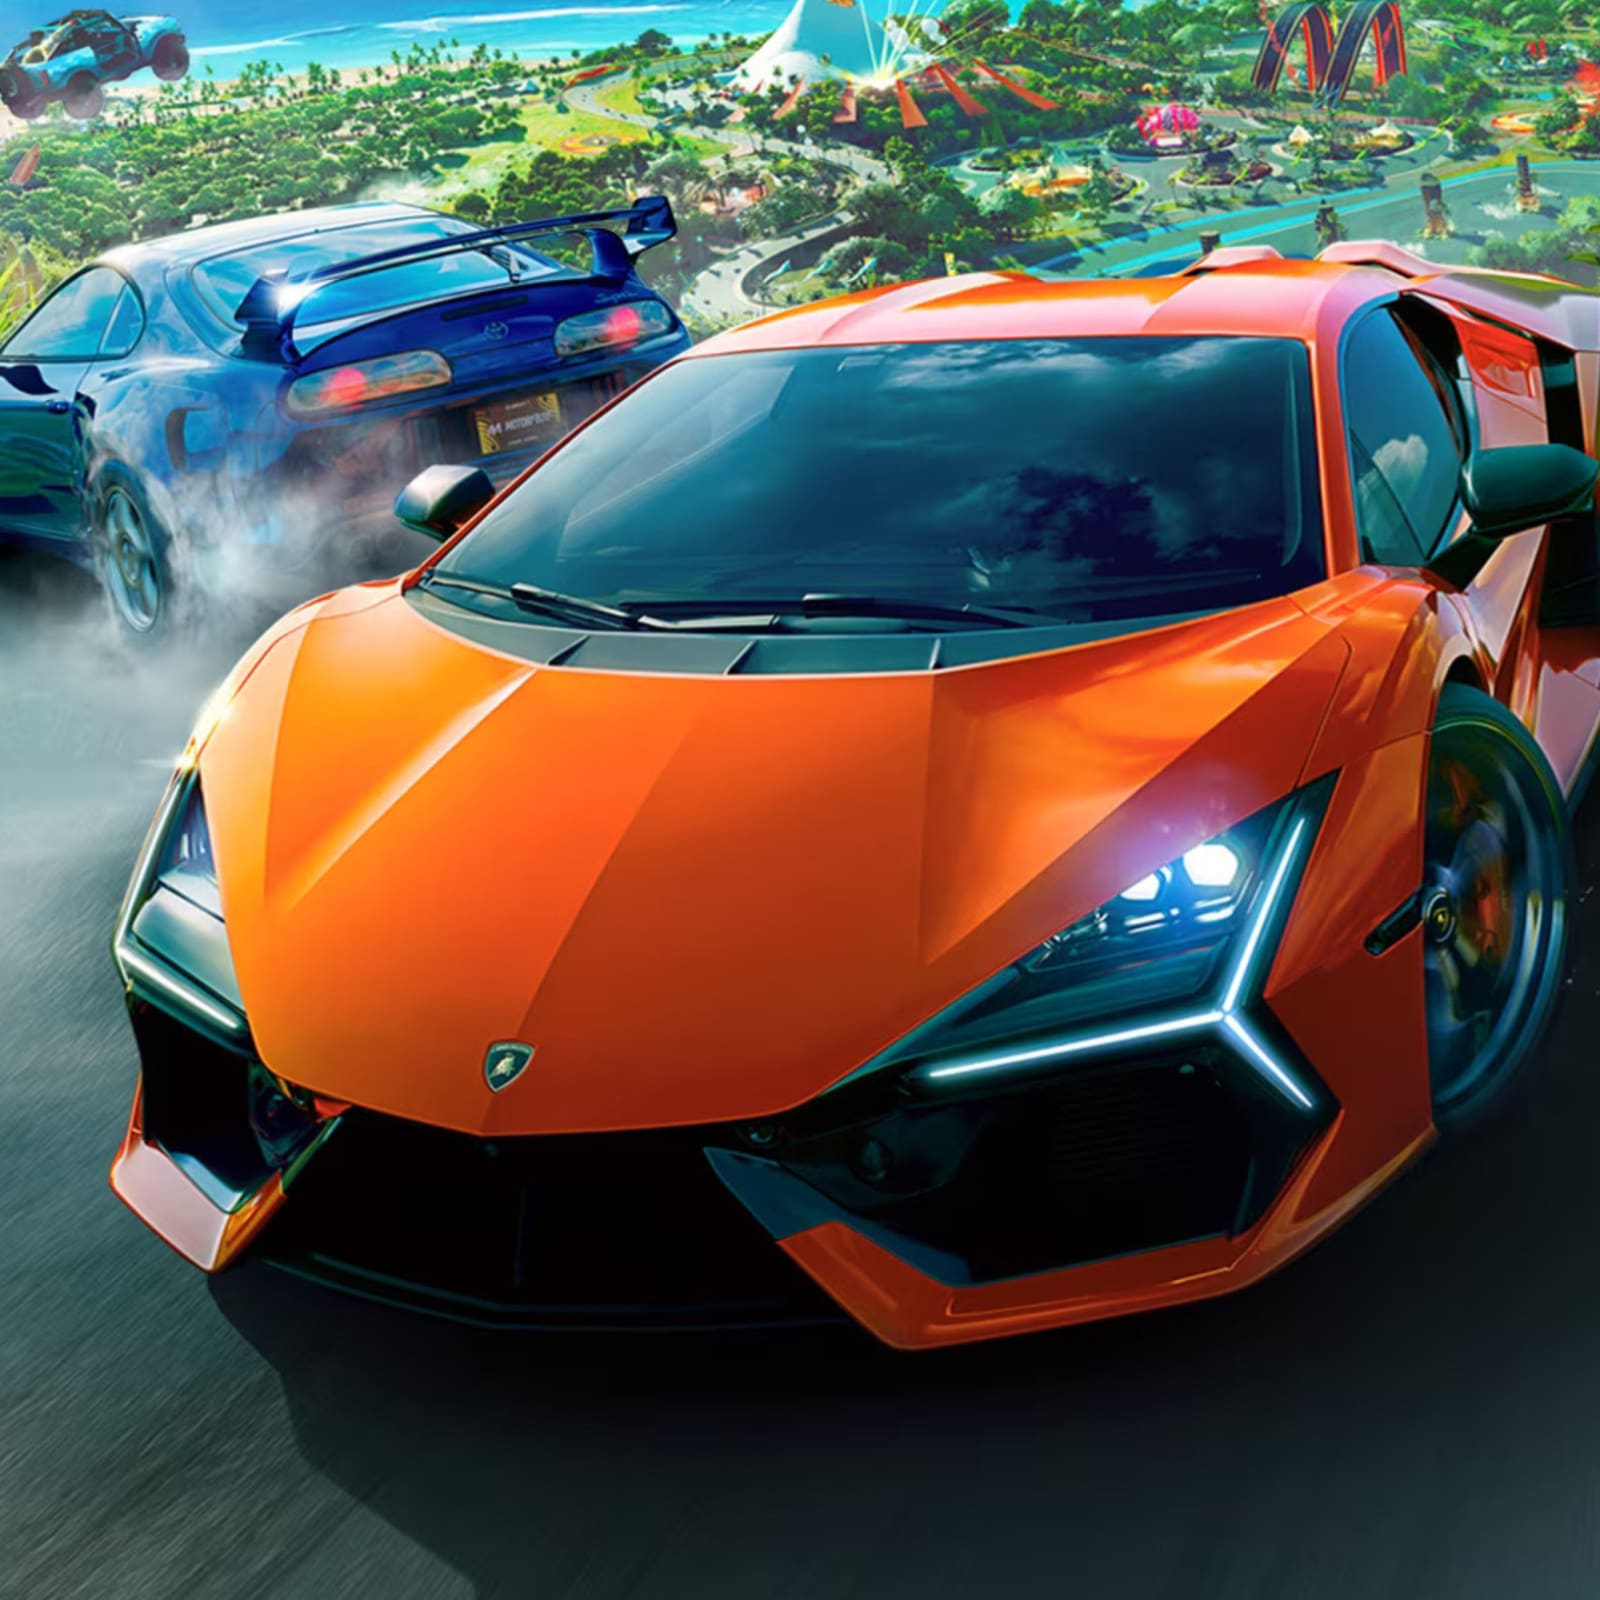 The Crew Motorfest Accounts for sale - FunPay